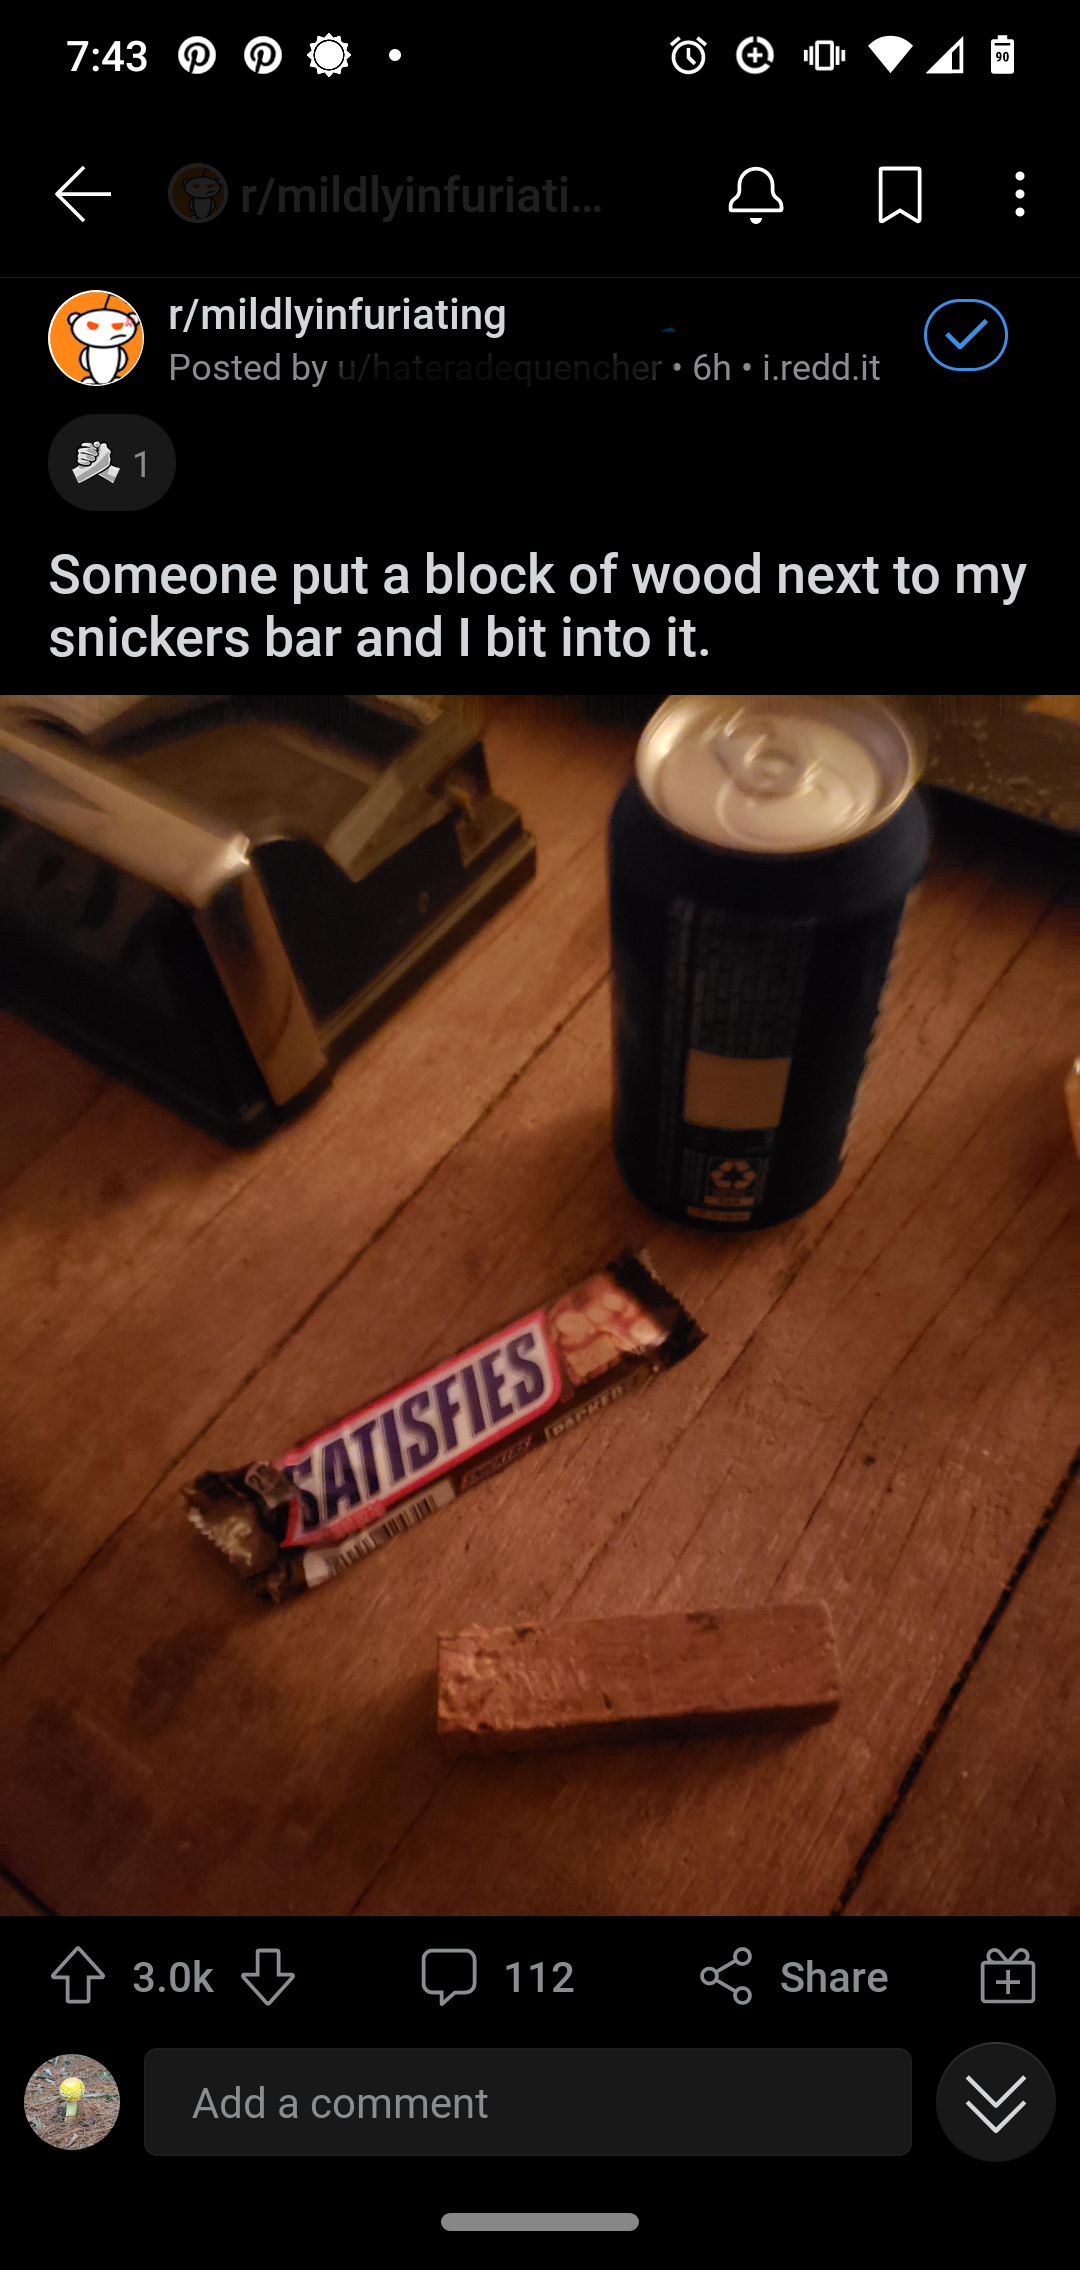 screenshot - rmildlyinfuriating Posted by tih i reddit Someone put a block of wood next to my snickers bar and I bit into it. Satisfies 112 Add a comment